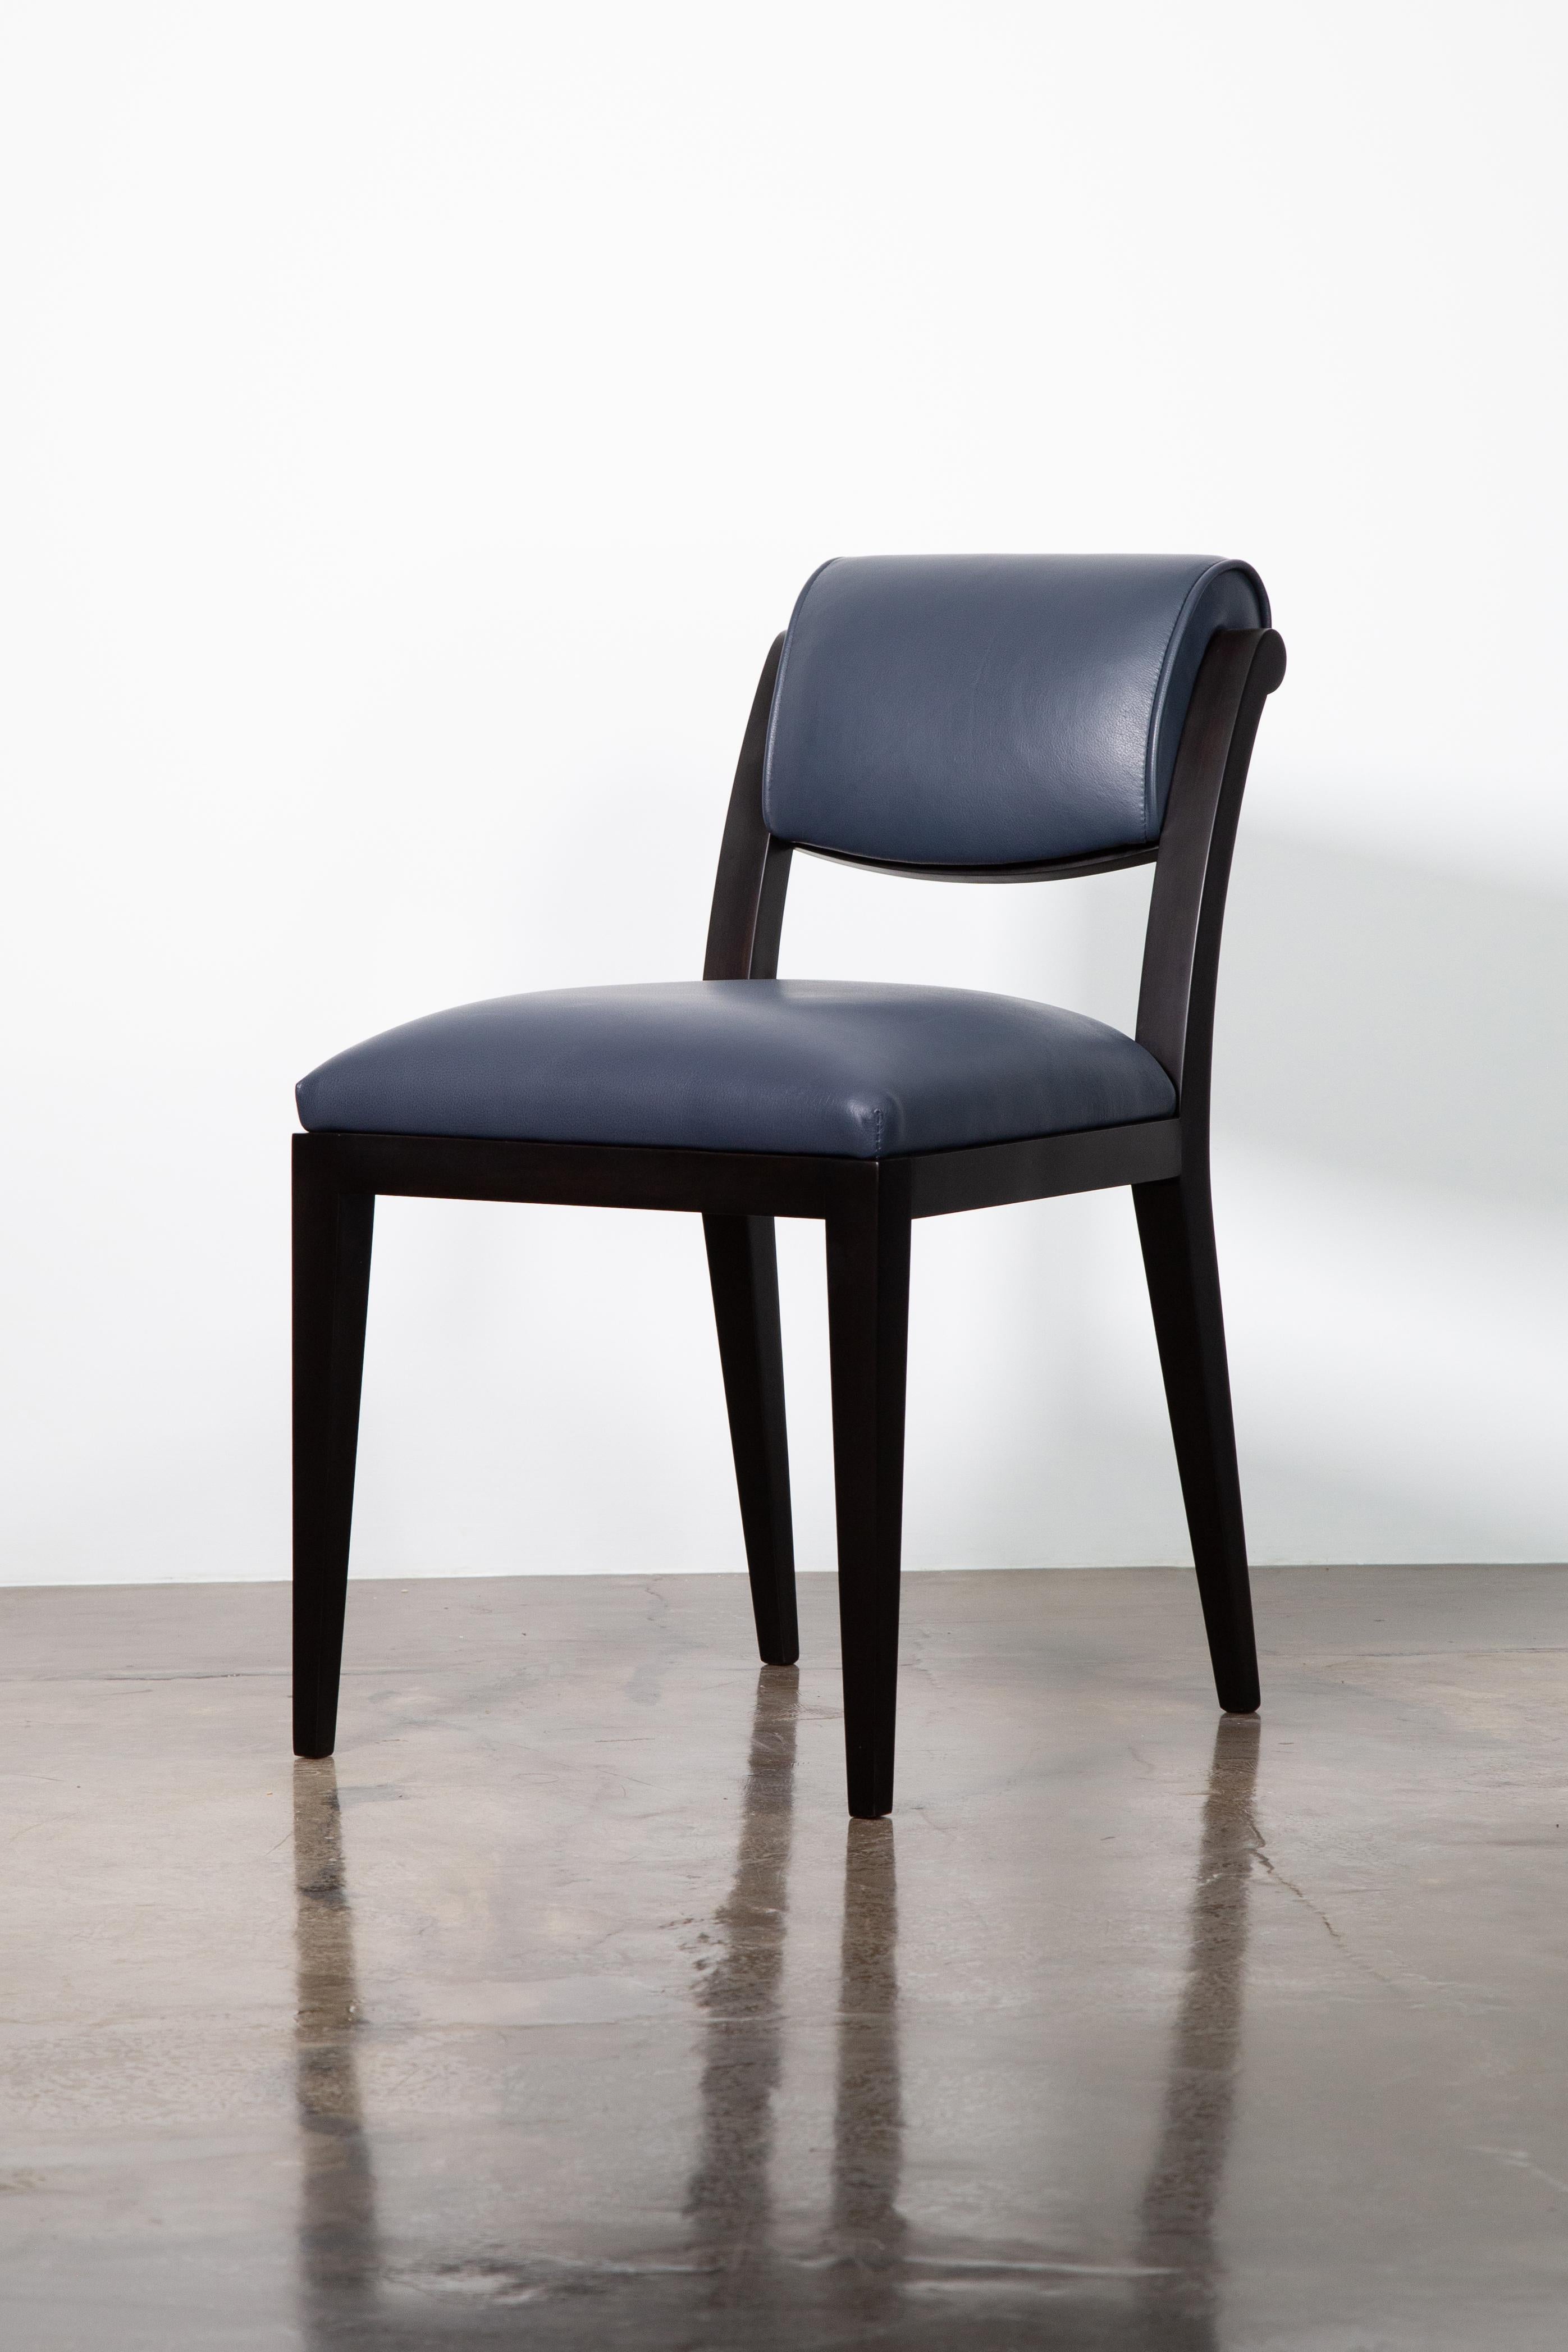 The Gianni dining chair borrows cues from the early-20th century Art Deco masters and features a light frame with a scrolled back. Shown in ebonized Argentine Rosewood and leather. Available as shown or in the finish and upholstery material of your